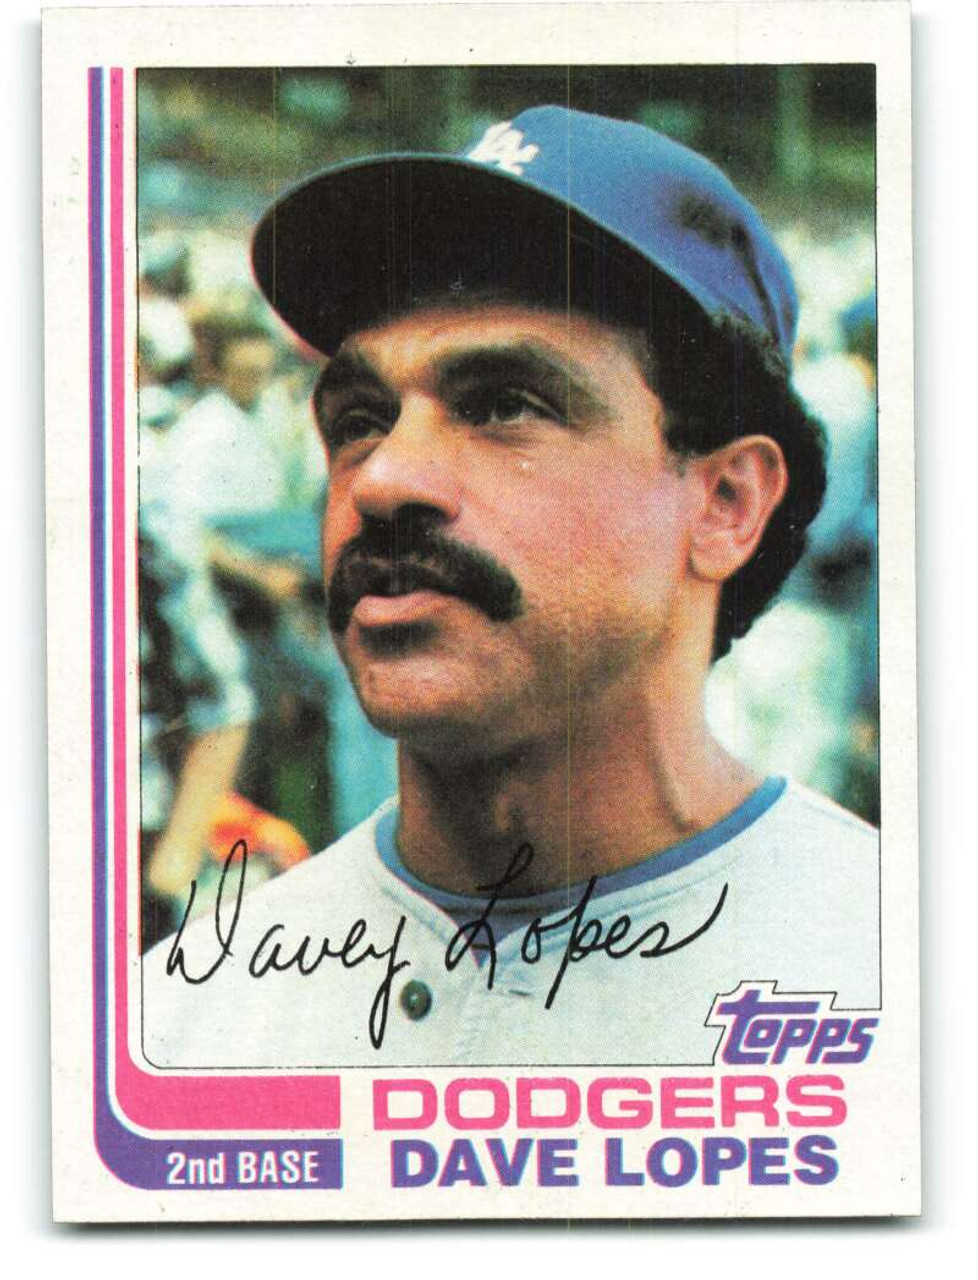 1982 Topps #740 Davey Lopes VG Los Angeles Dodgers